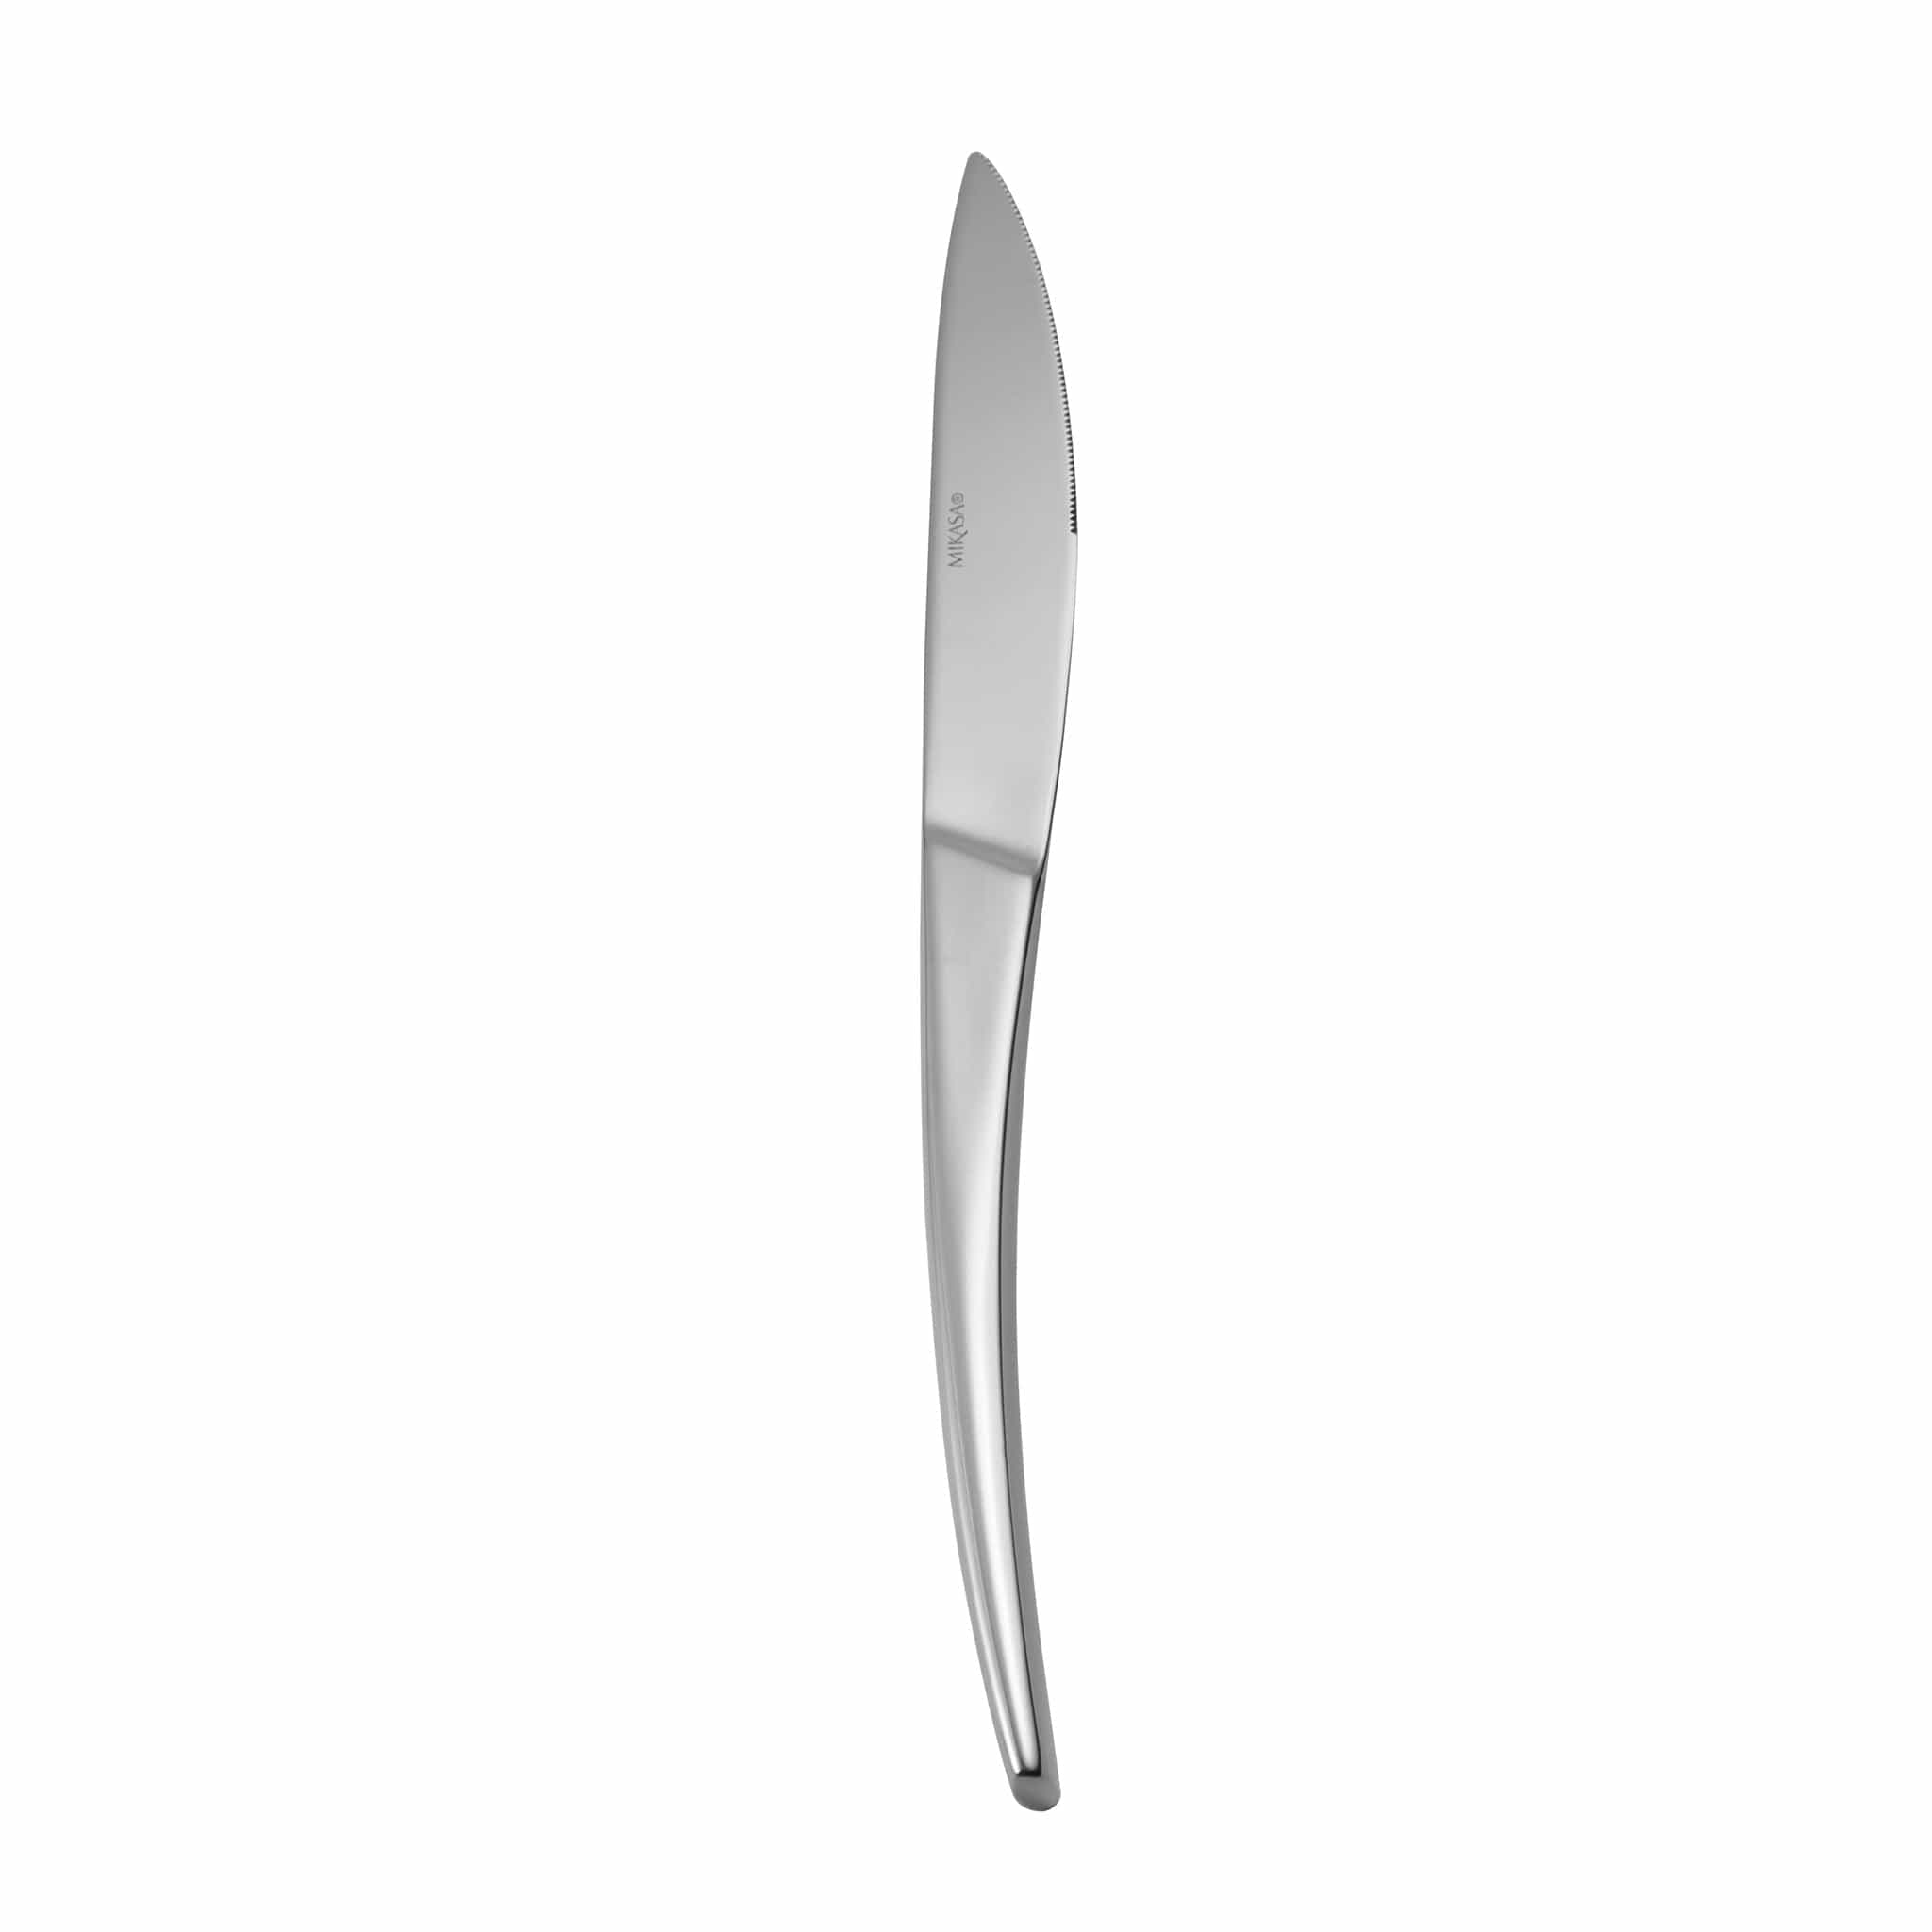 Maximilian 18/10 Table Knife 6.3" Stainless Steel